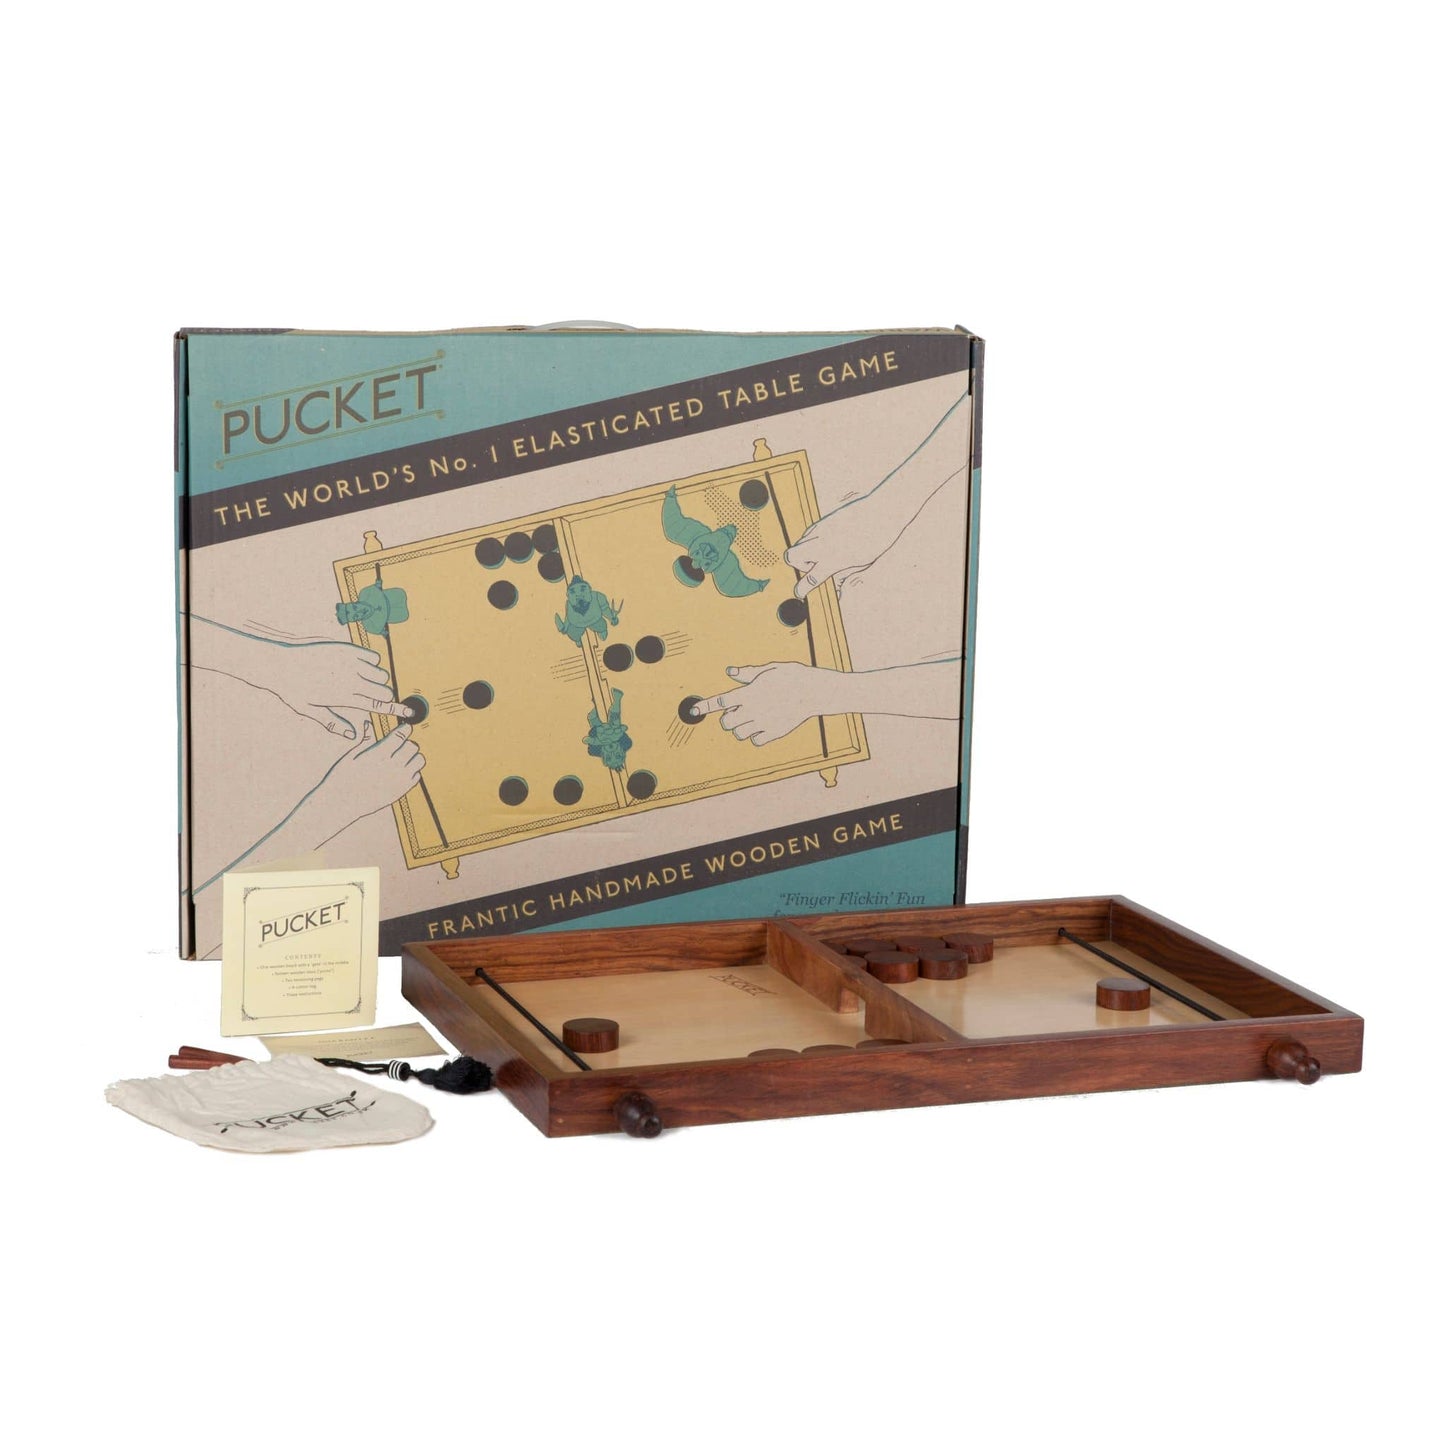 Pucket game - Pucket from ET Games - Fair Trade and handmade wooden game